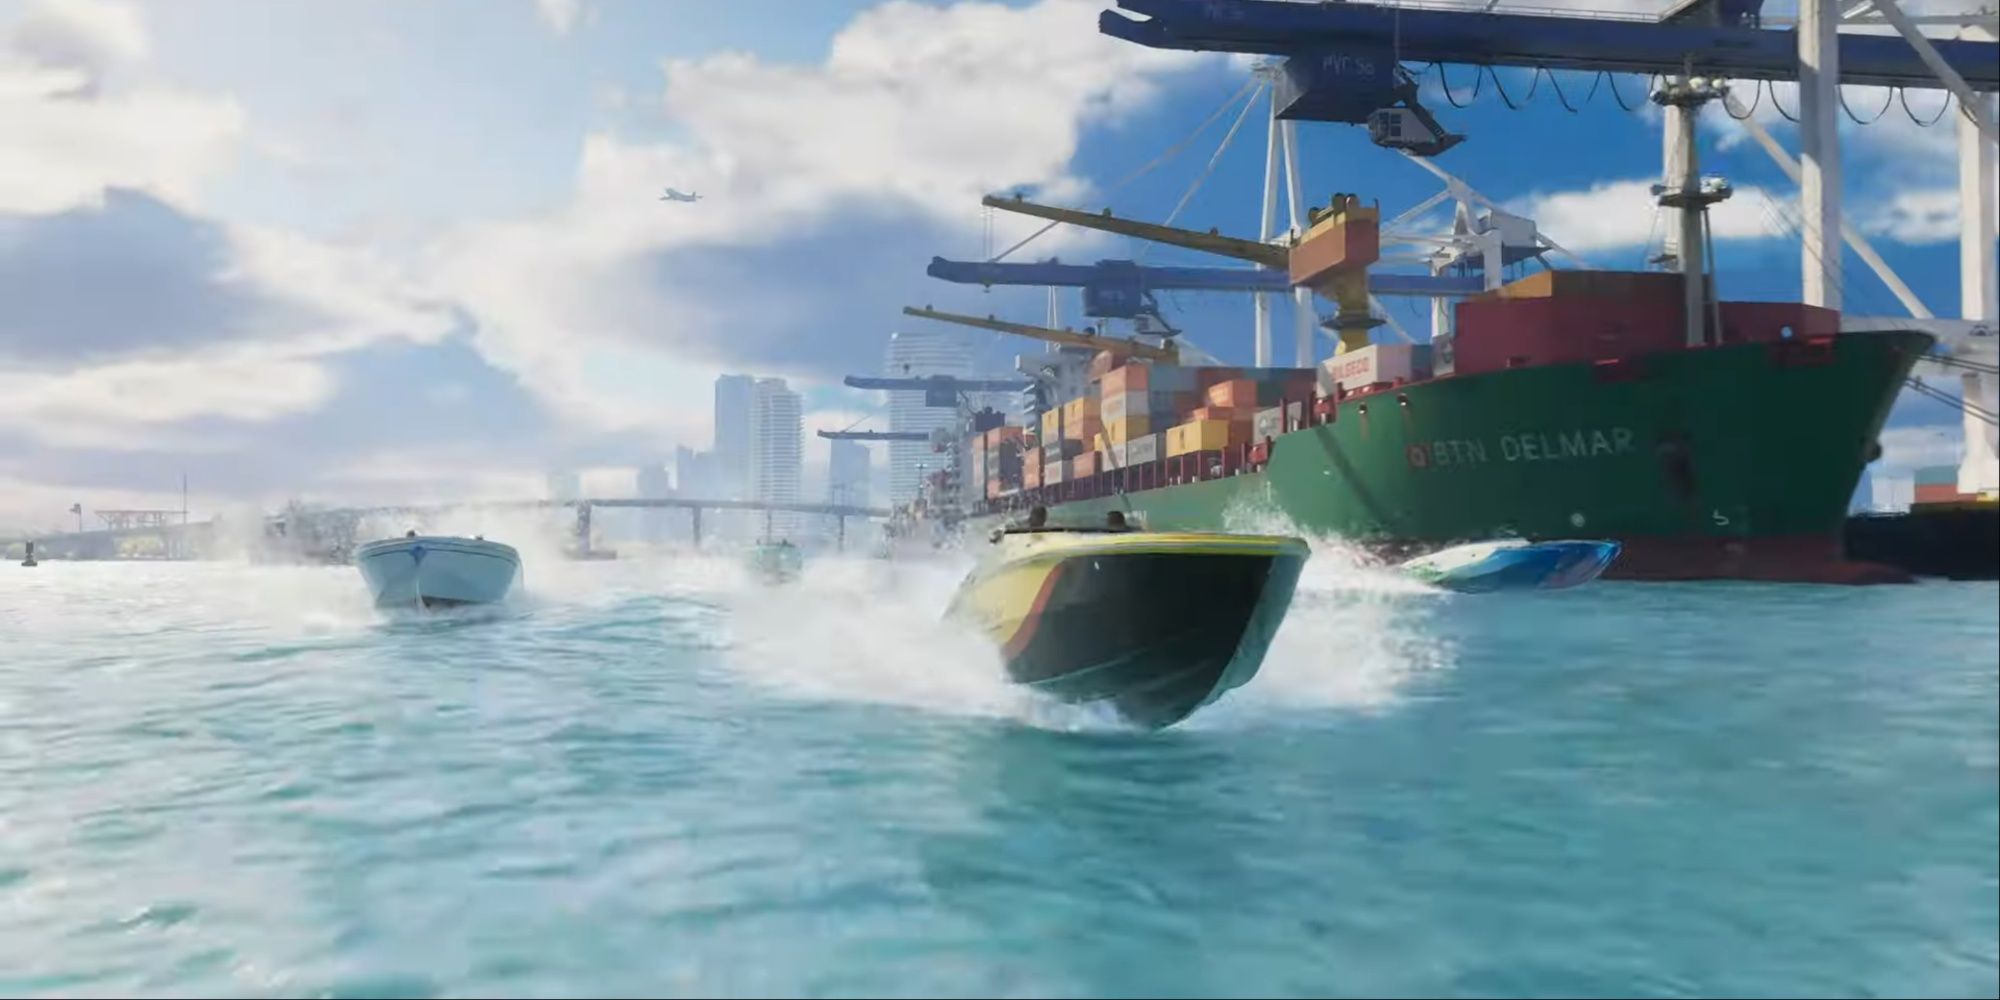 A boat race showing off the new boat designs and water physics, happening near a large cargo ship at sea.